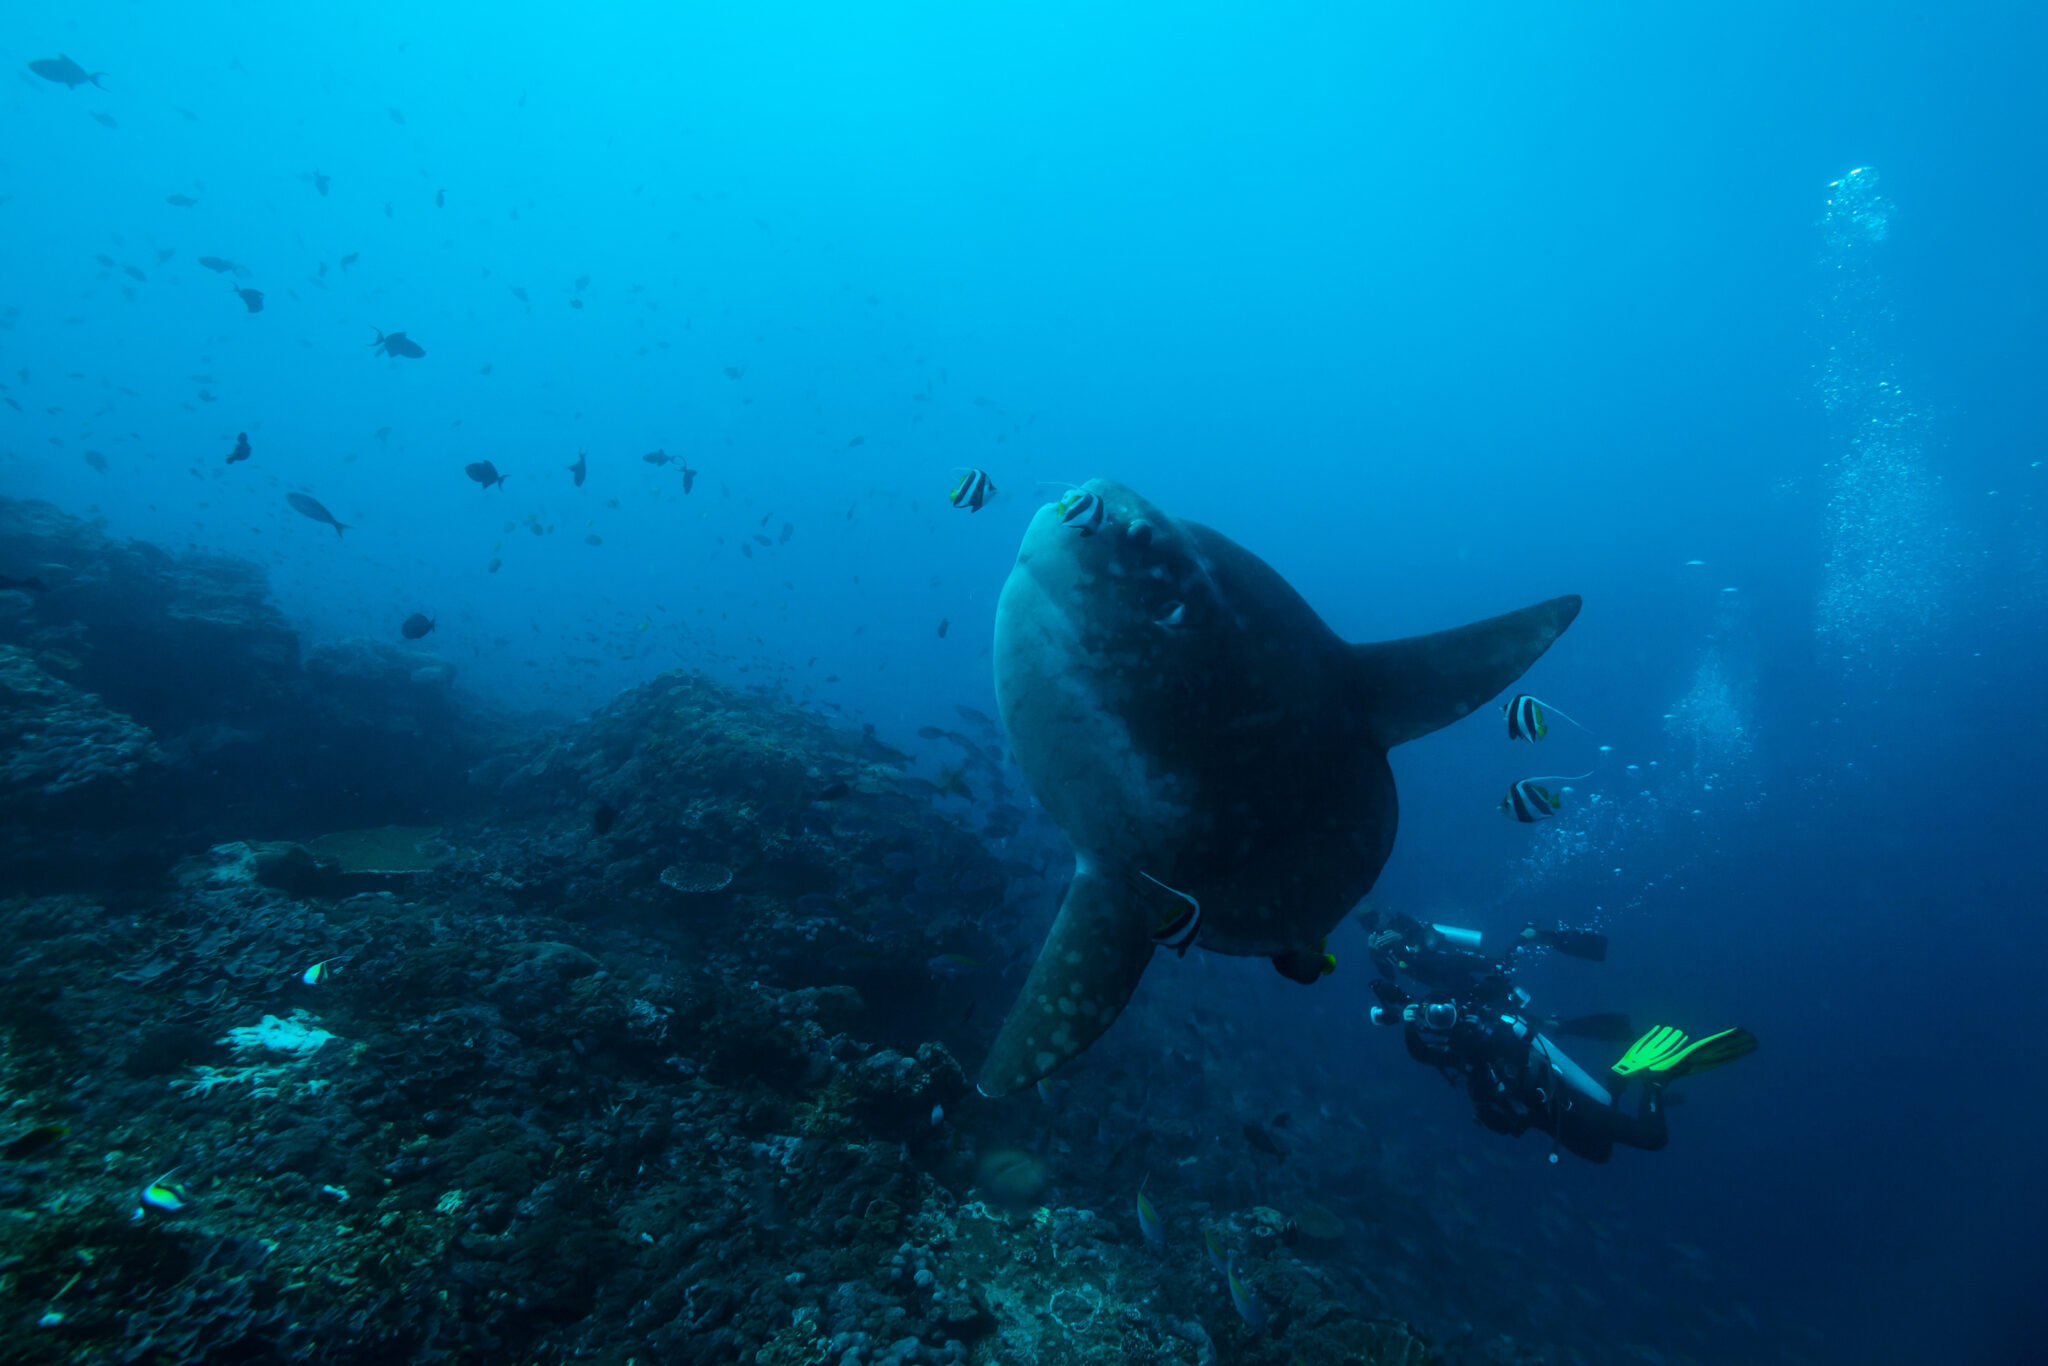 A diver watching a mola mola in the Galapagos Islands, one of the top 5 scuba diving destinations in the world in September